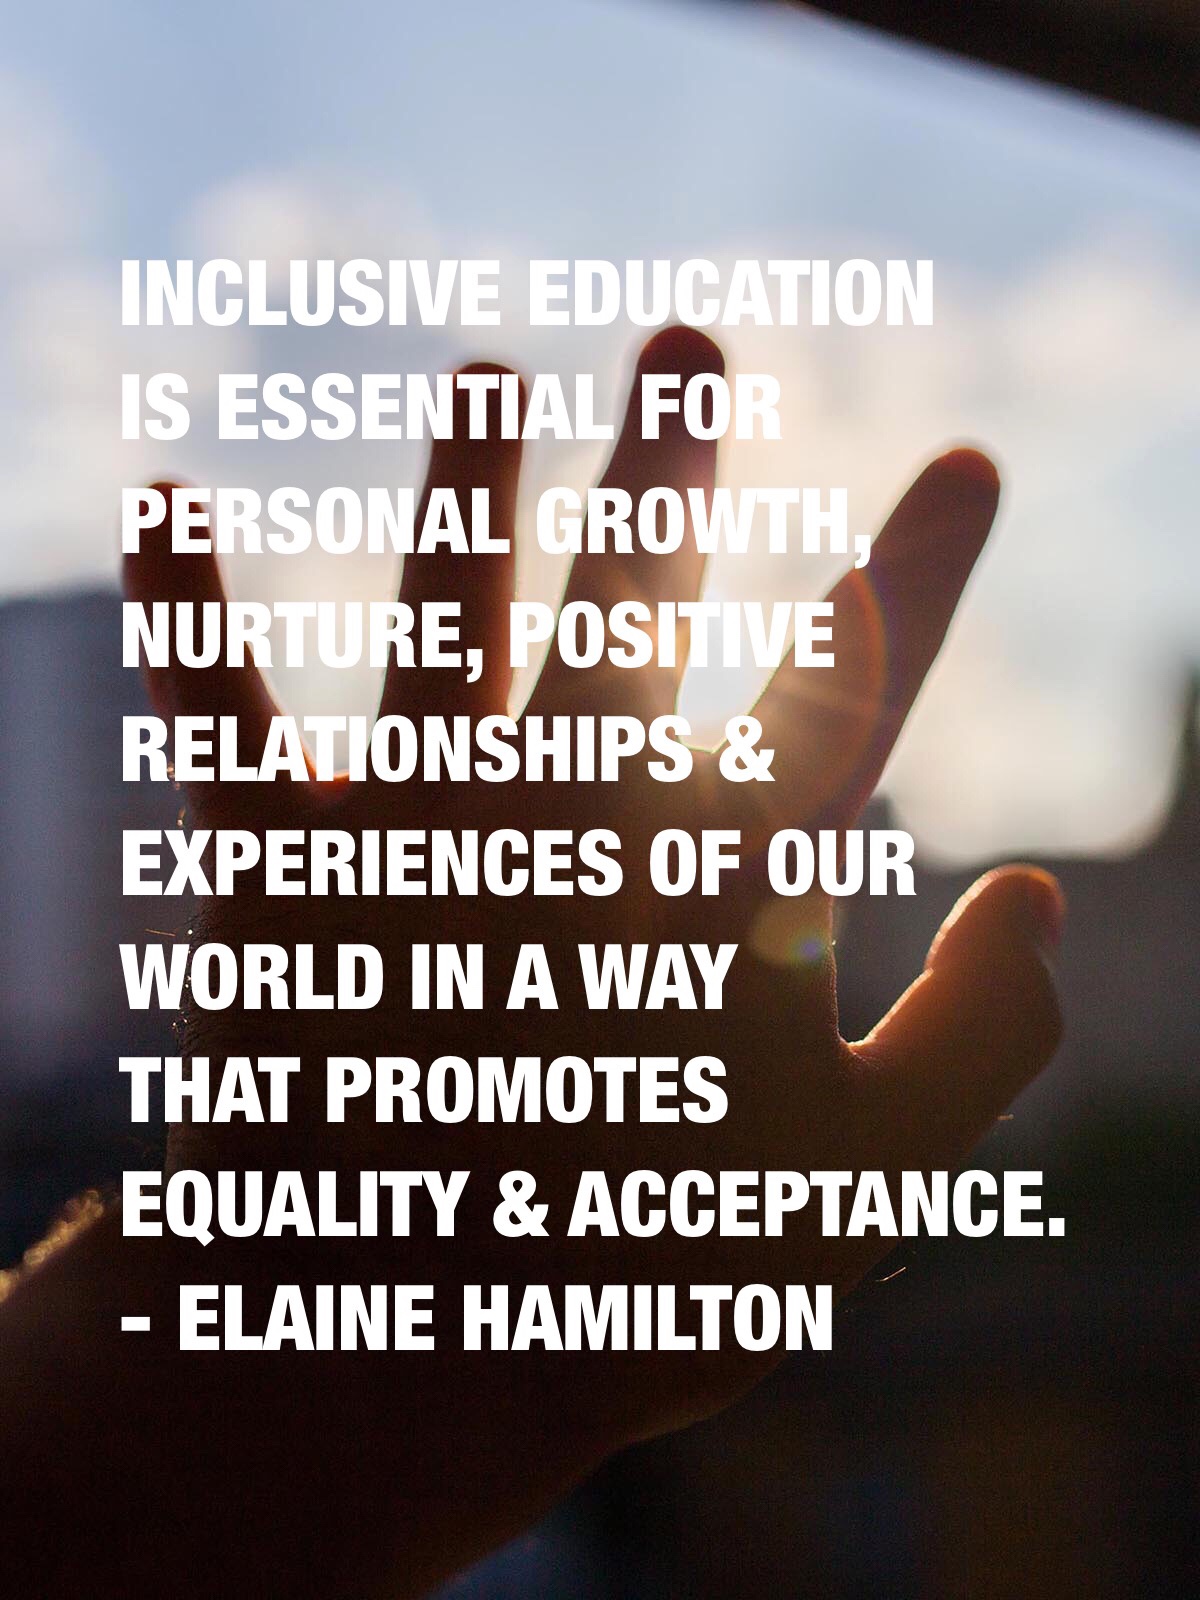 Inclusive education is essential for personal growth, nurture, positive relationships & experiences of our world in a way that promotes equality & acceptance. - Elaine Hamilton